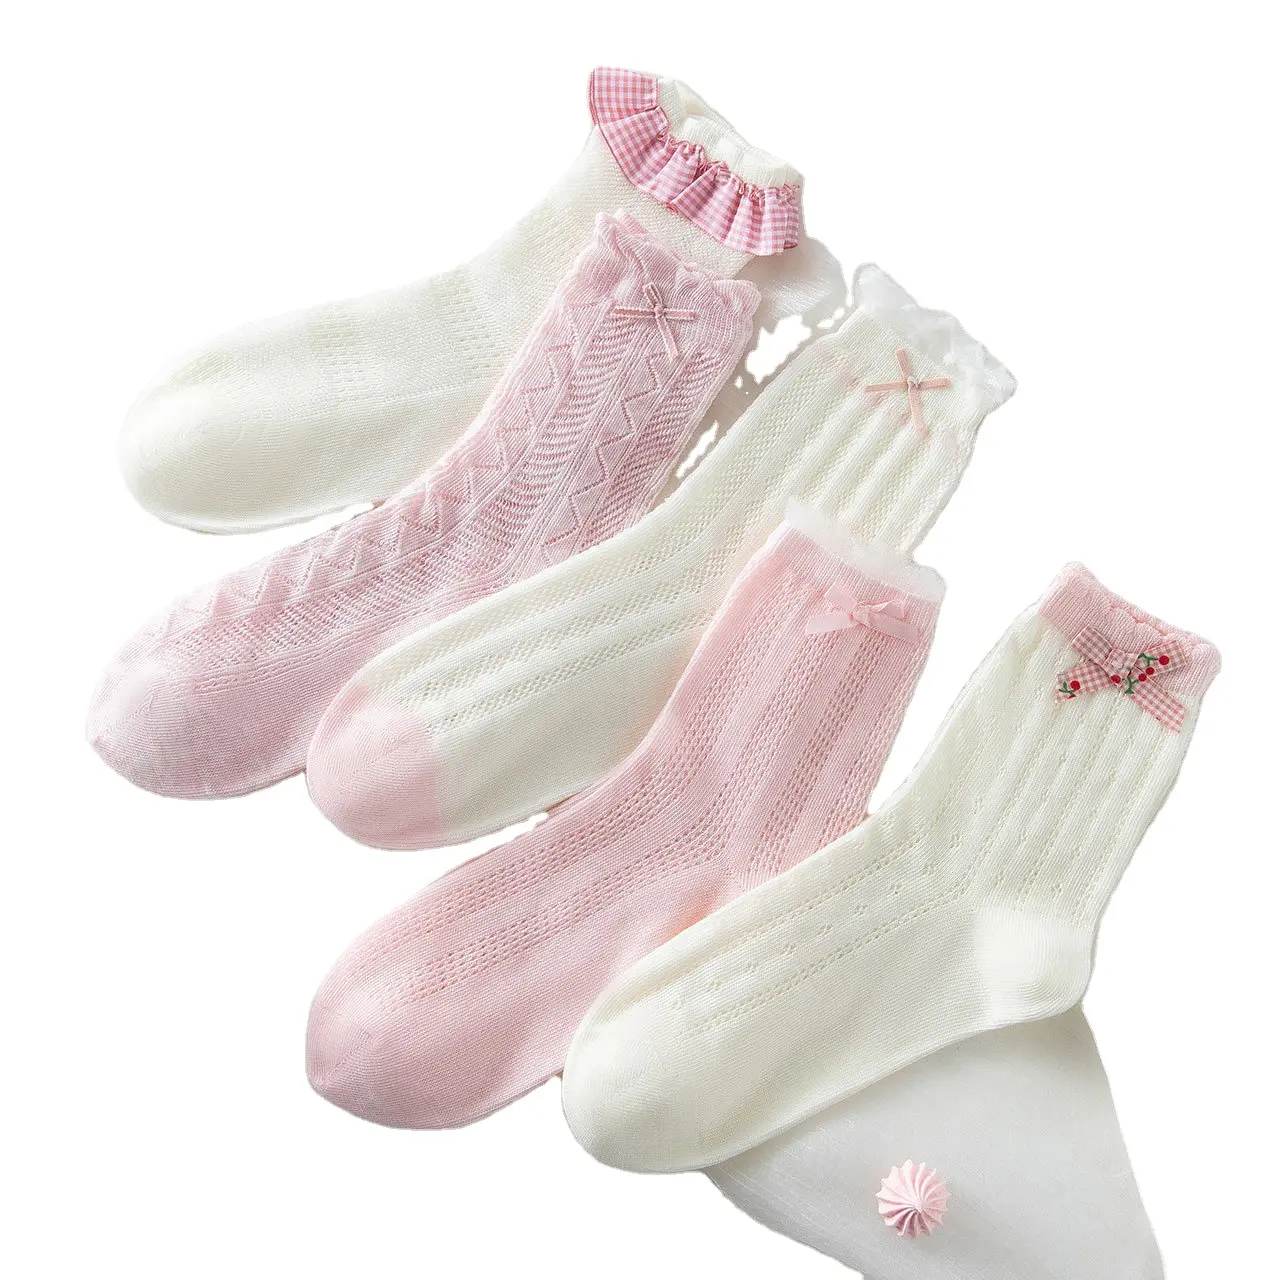 2023 New High Quality ladies Preppy style lace bow Socks cotton comfortable colorful cute women Socks for girl